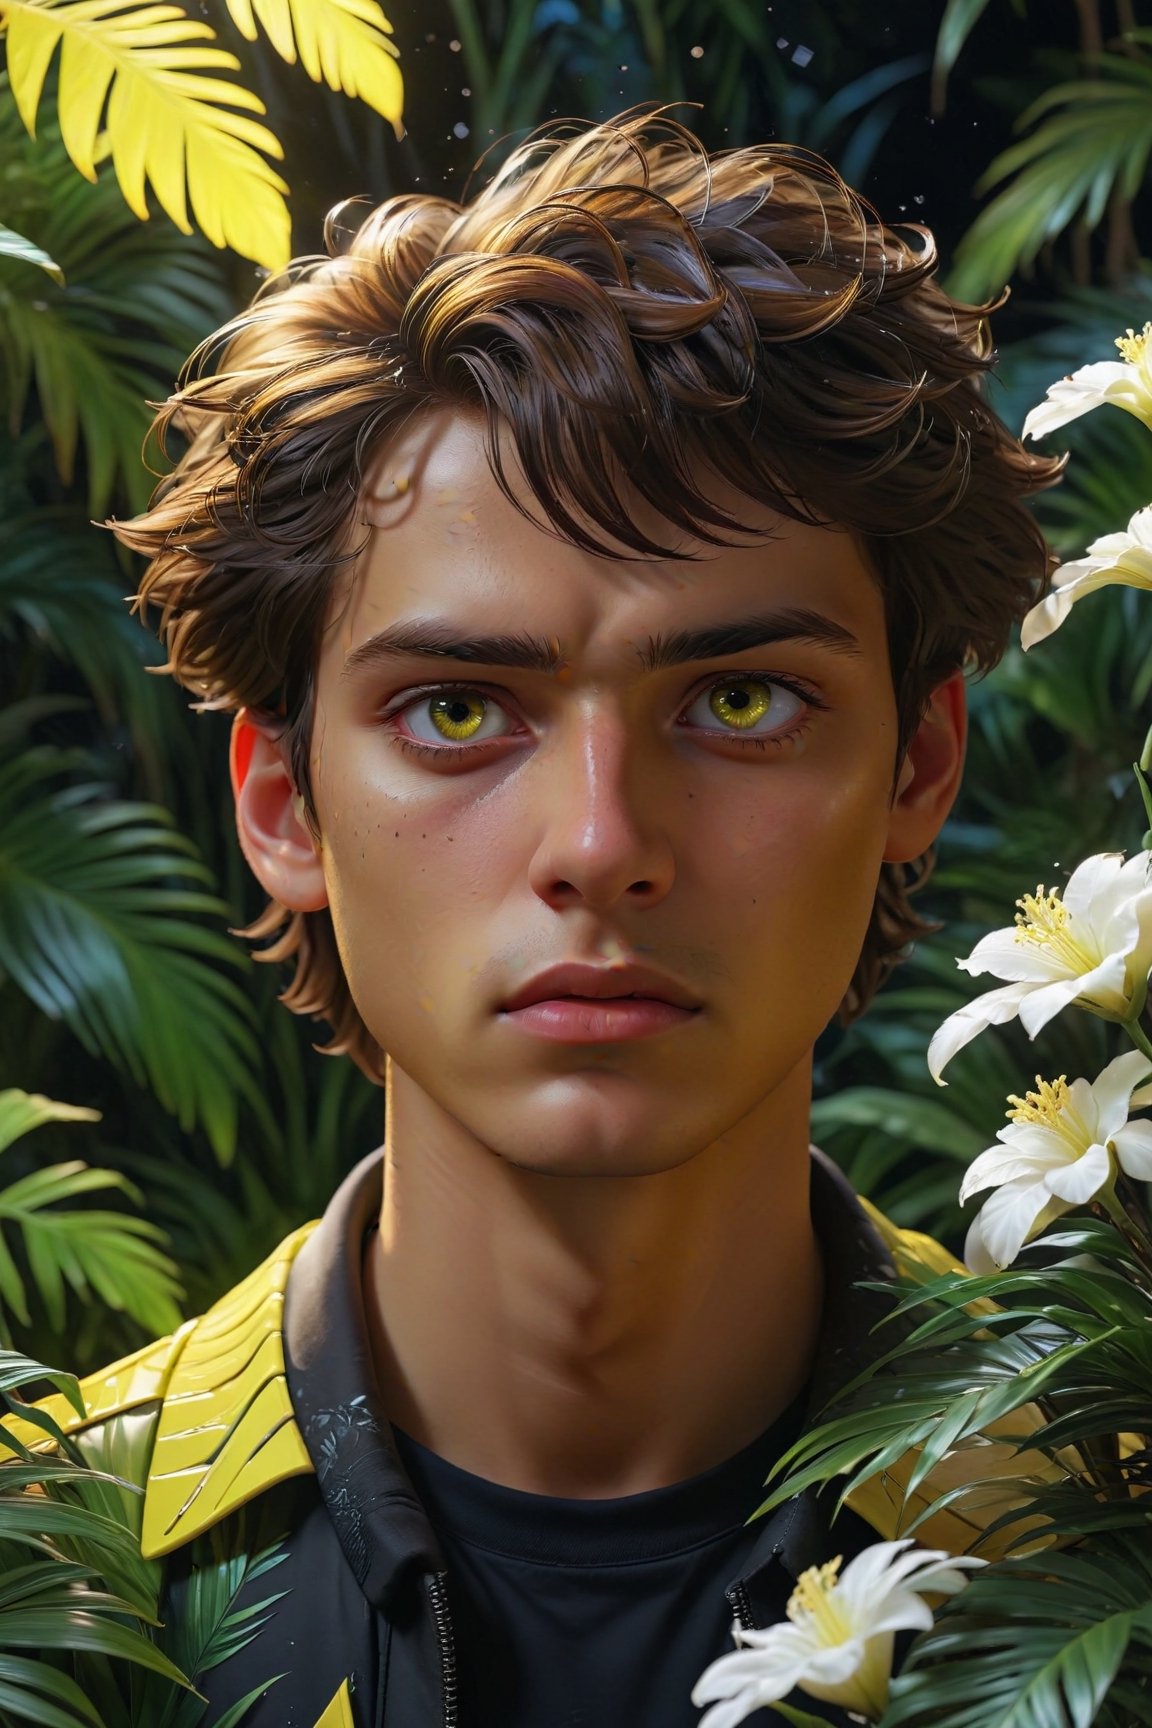 (best quality, 8K, ultra-detailed, masterpiece), 3D, A mesmerizing 8K portrait capturing the essence of a solitary boy in a close-up view, his gaze fixed afar, set against the backdrop of a synthwave art style poster. The scene is adorned with lush palm leaves and delicate white flowers, adding an intriguing geometric pattern to the composition. The entire setting is bathed in a neon yellow glow, reminiscent of the synthwave aesthetic, against a dark, starry night sky illuminated by bioluminescent elements. This artwork radiates fortitude and wholesome beauty, inviting you to immerse yourself in its unique and captivating world.